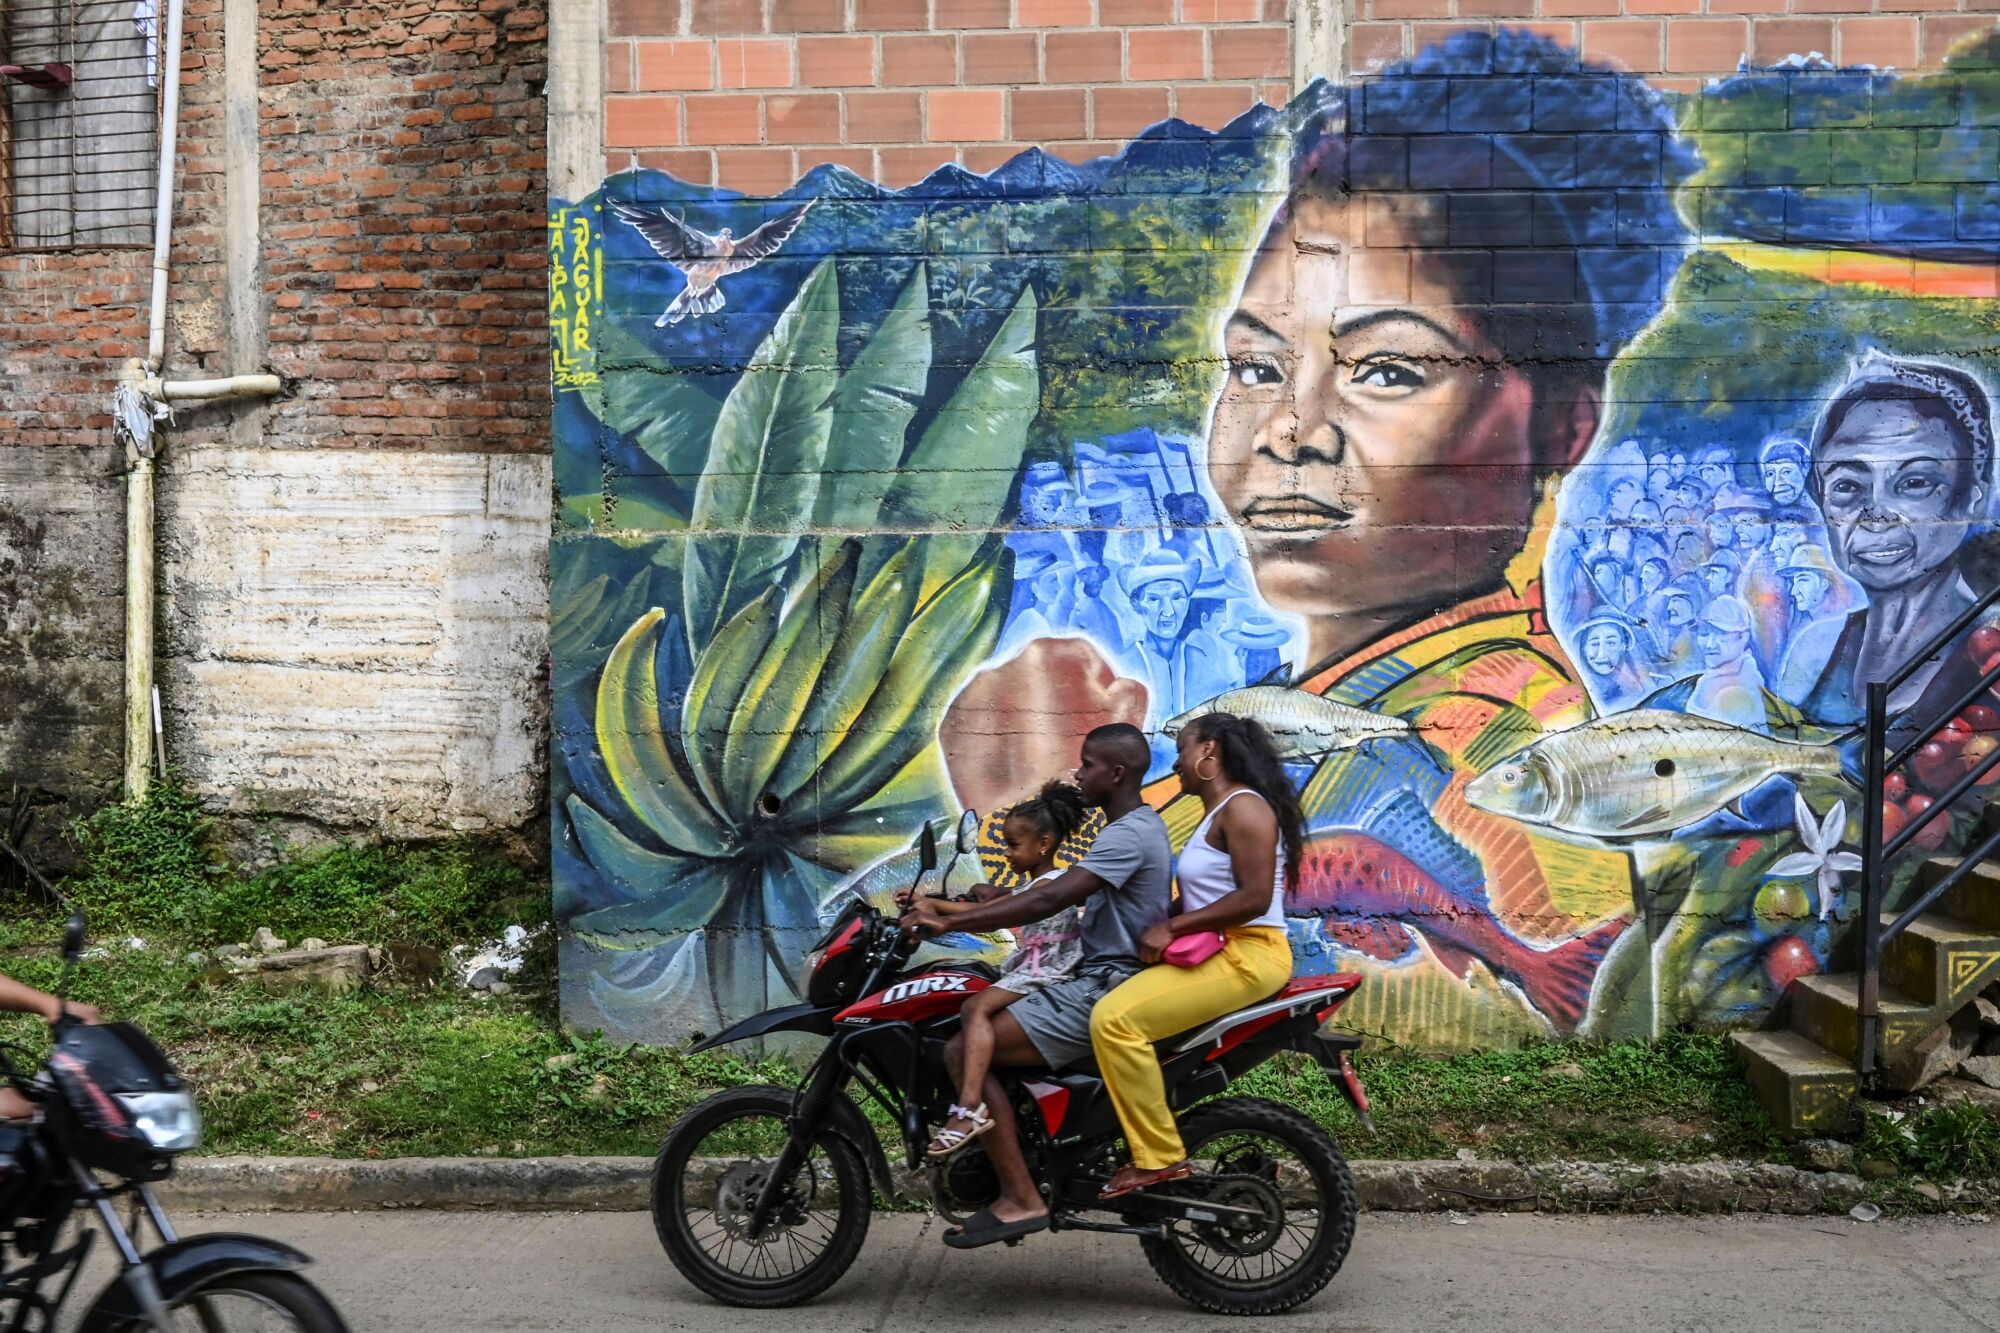 Three people on a motorcycle pass a mural of a woman's face